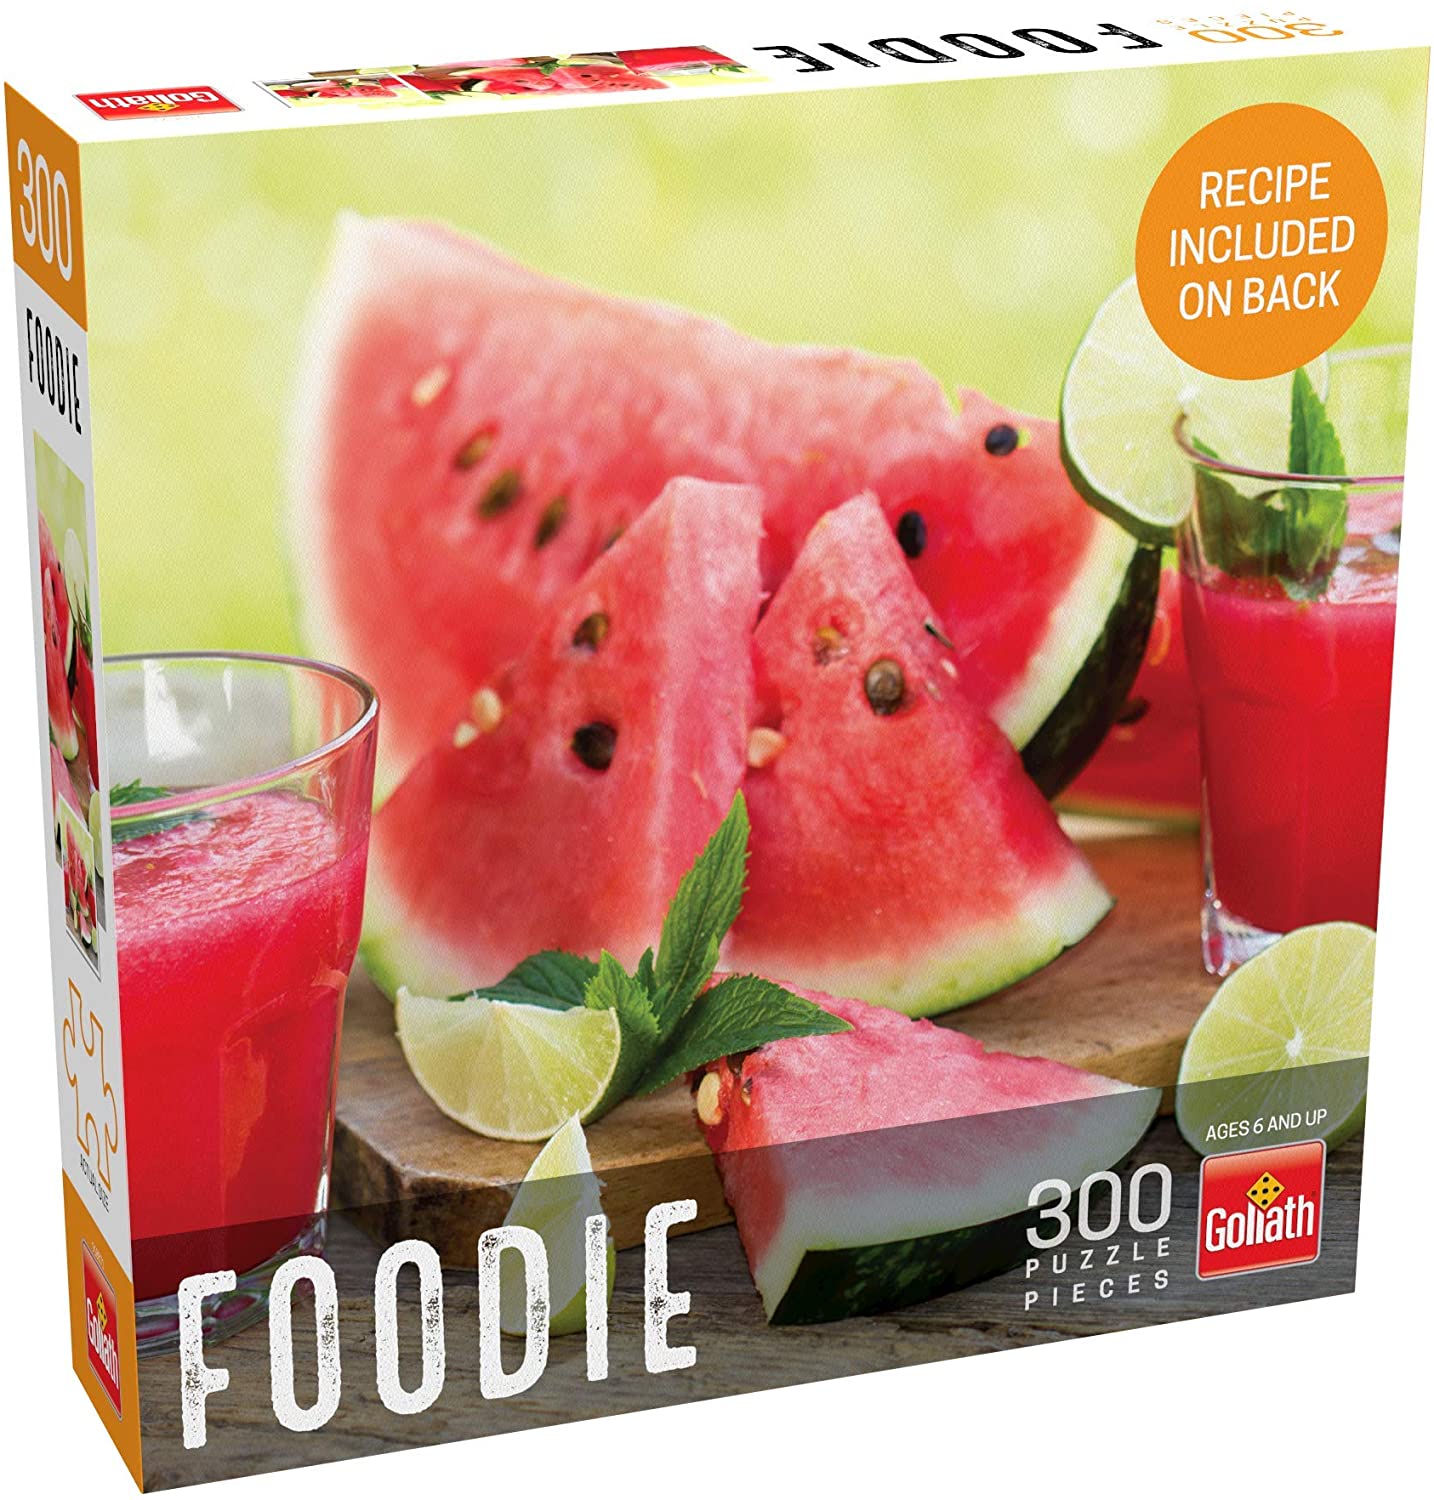 Foodie: Watermelon Smoothie (300pc puzzle)